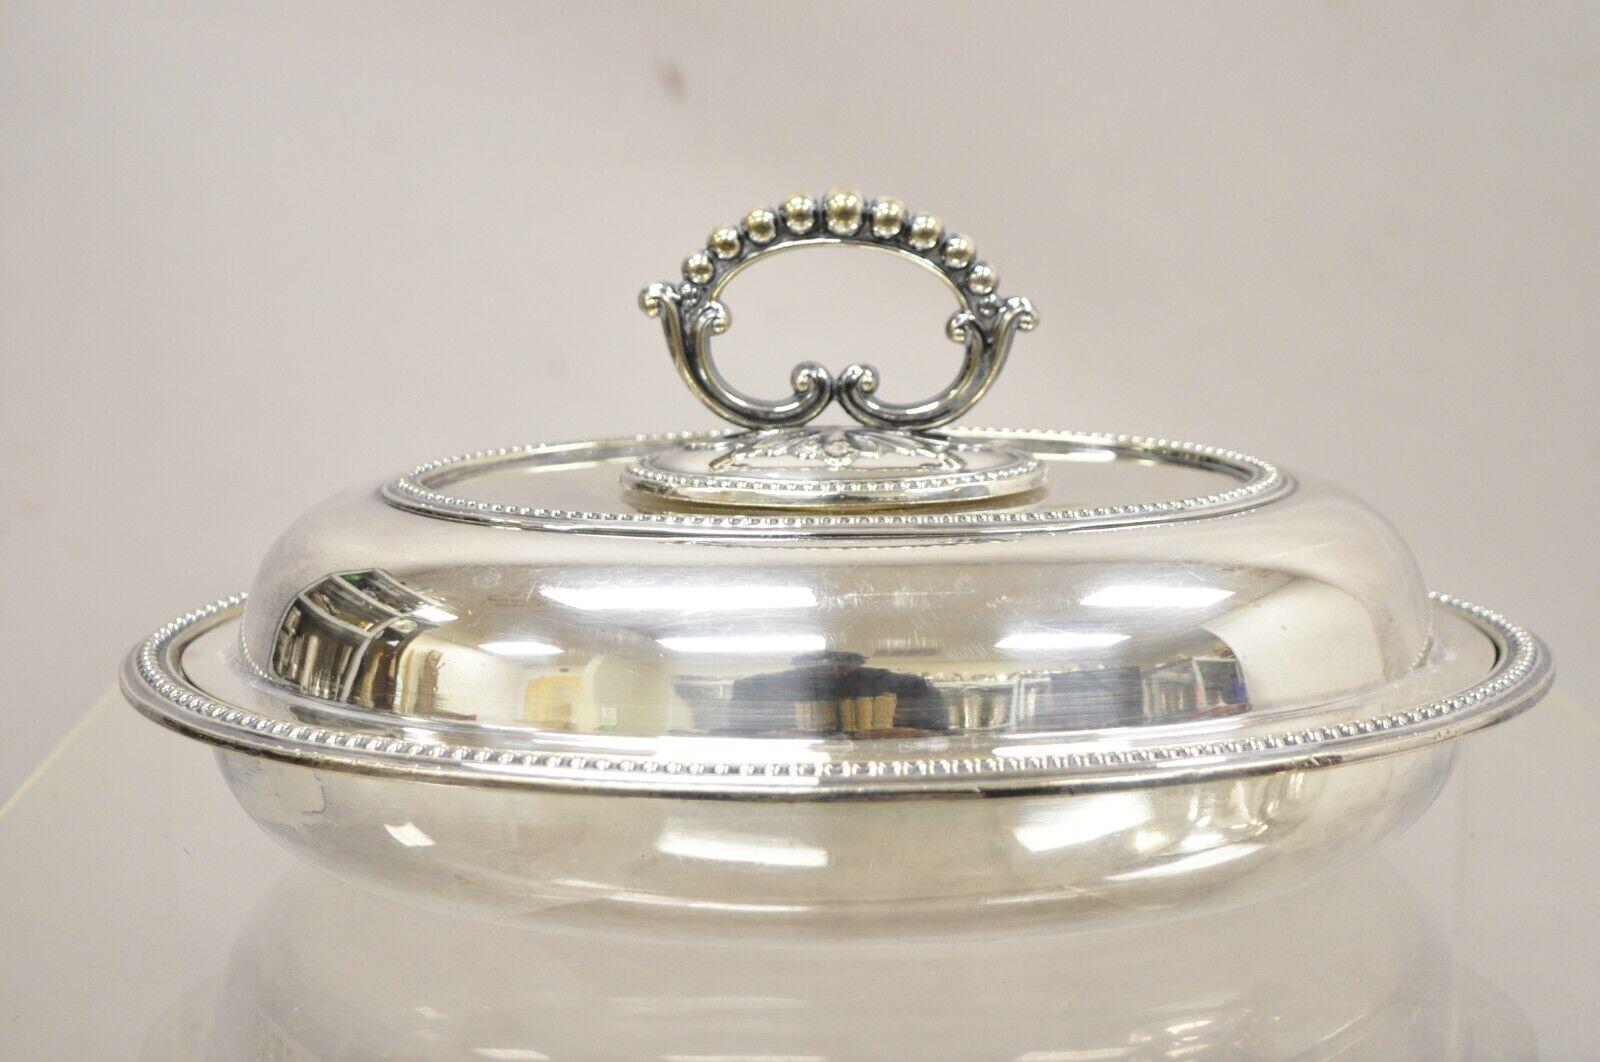 Mappin & Webb's Prince's Plate English Sheffield Silver Plated Covered Dish im Angebot 4